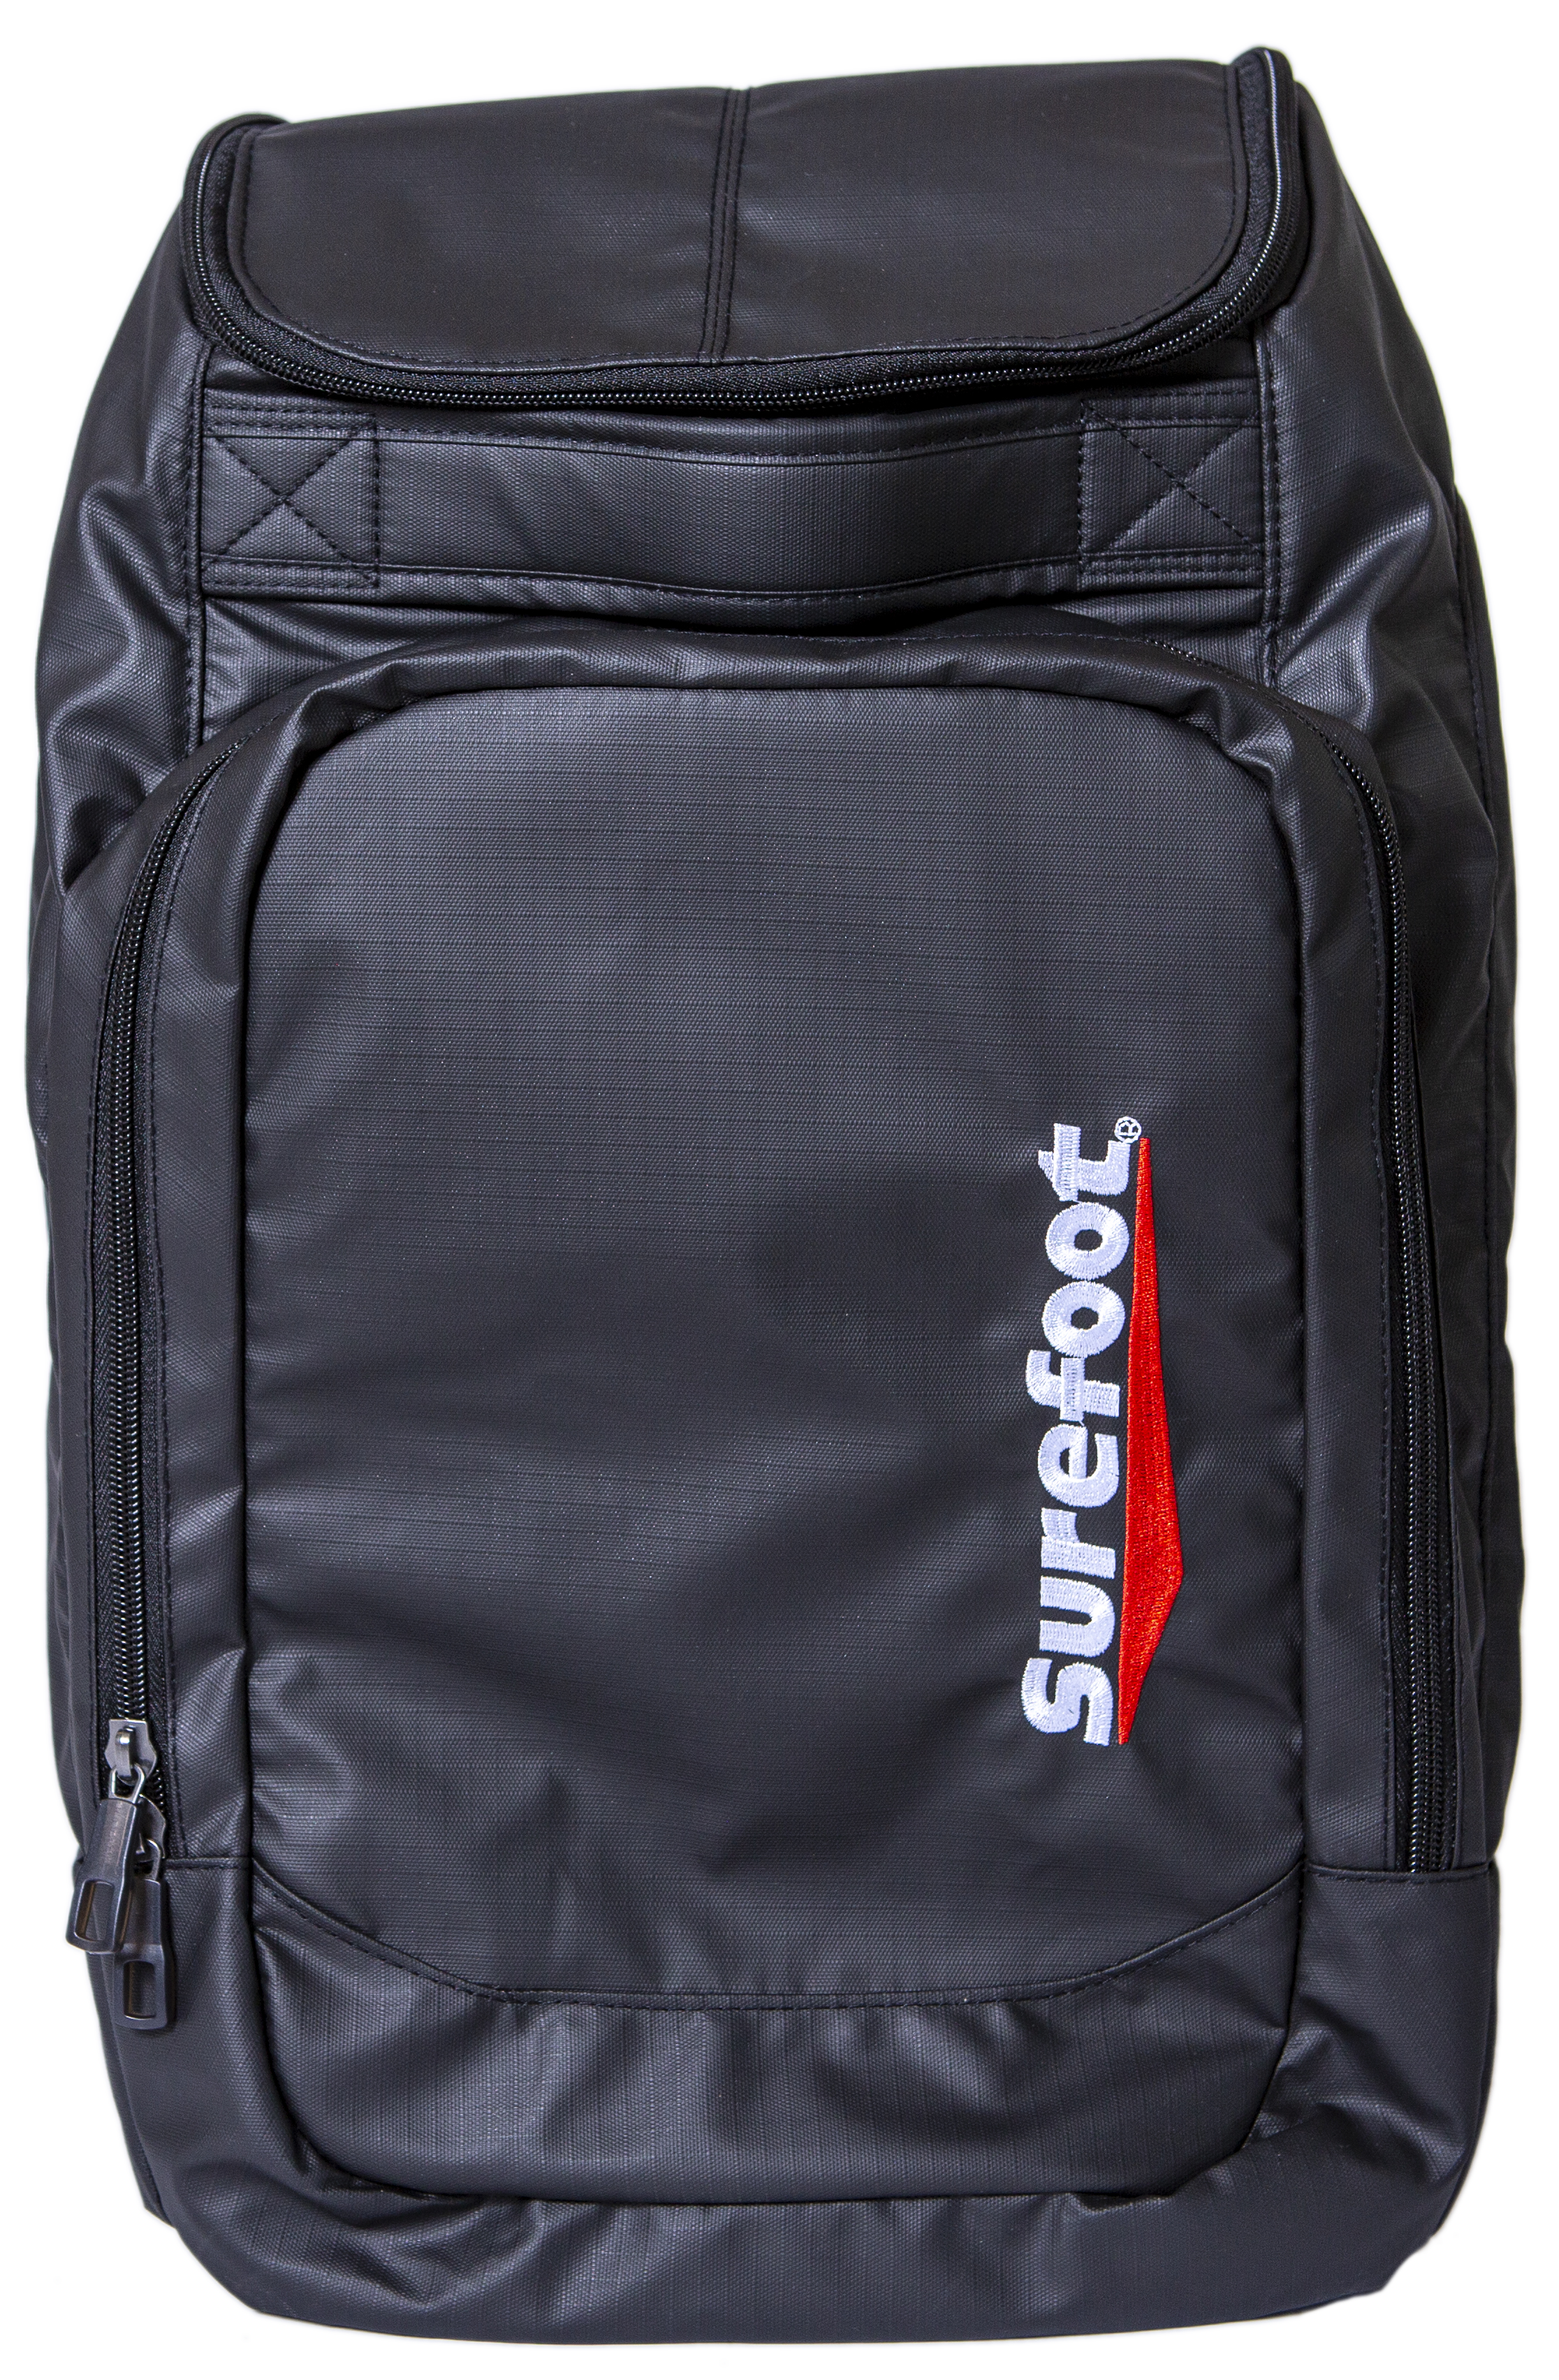 Black square backpack with Surefoot logo in white and red on right corner. Two compartments on the front and one handle.